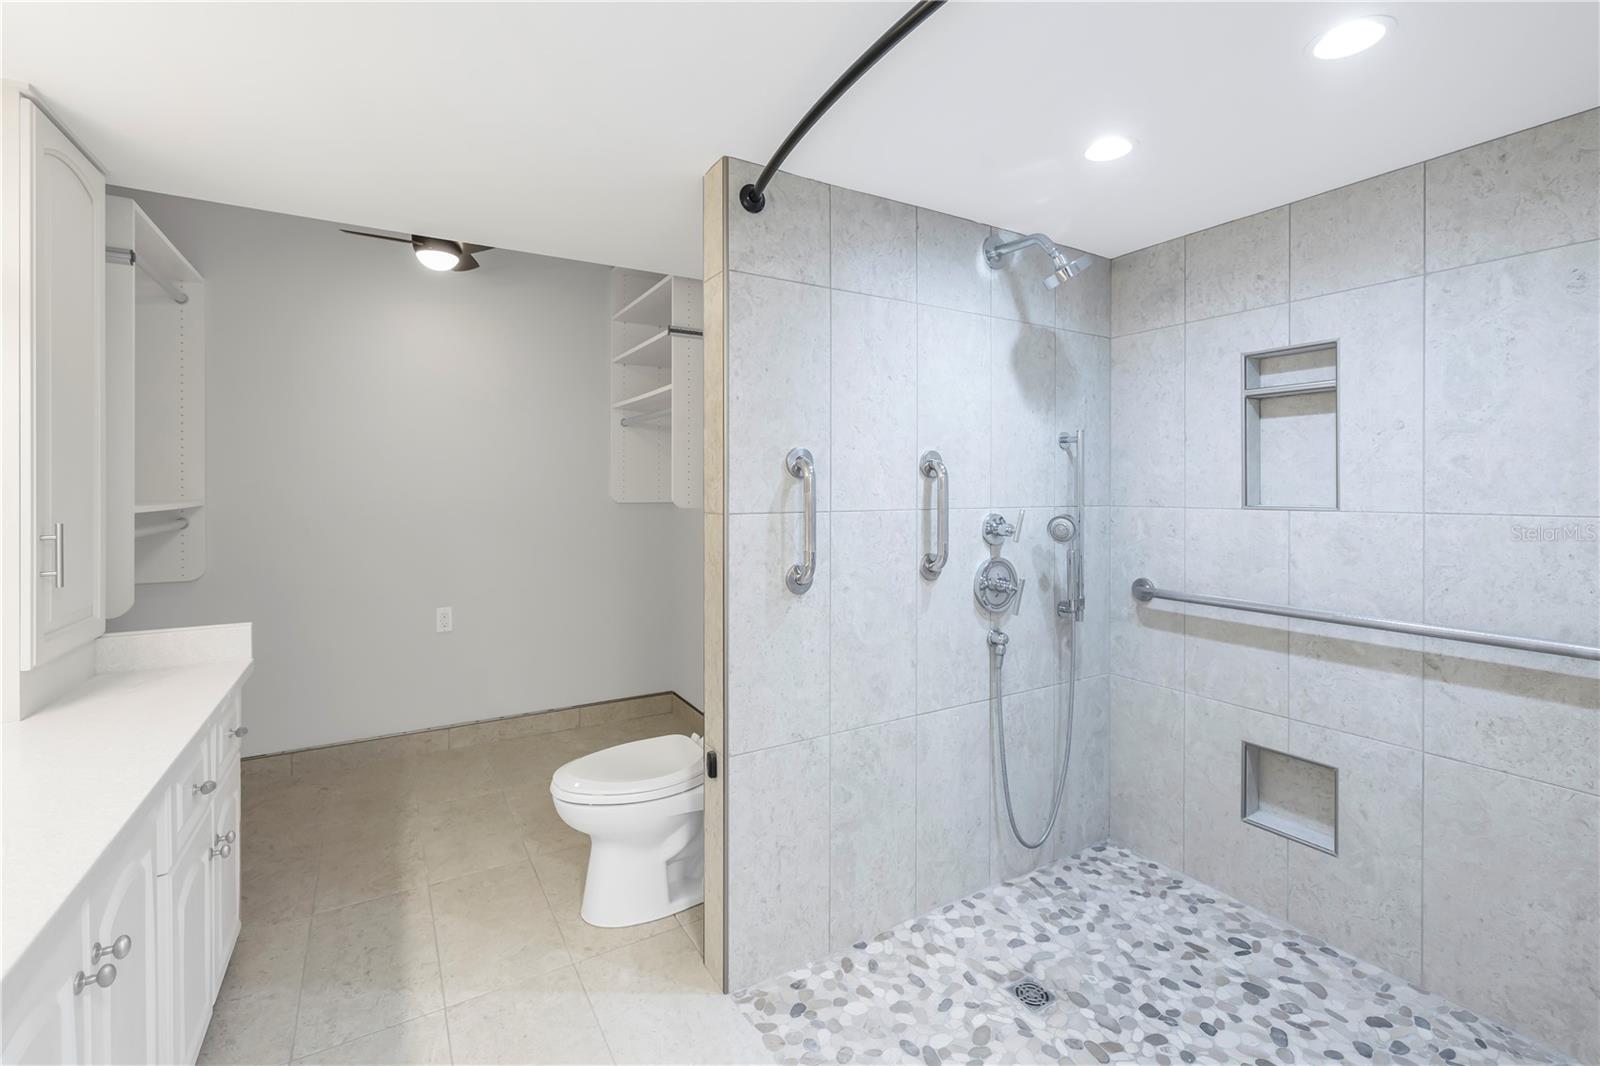 Accessible shower primary bath